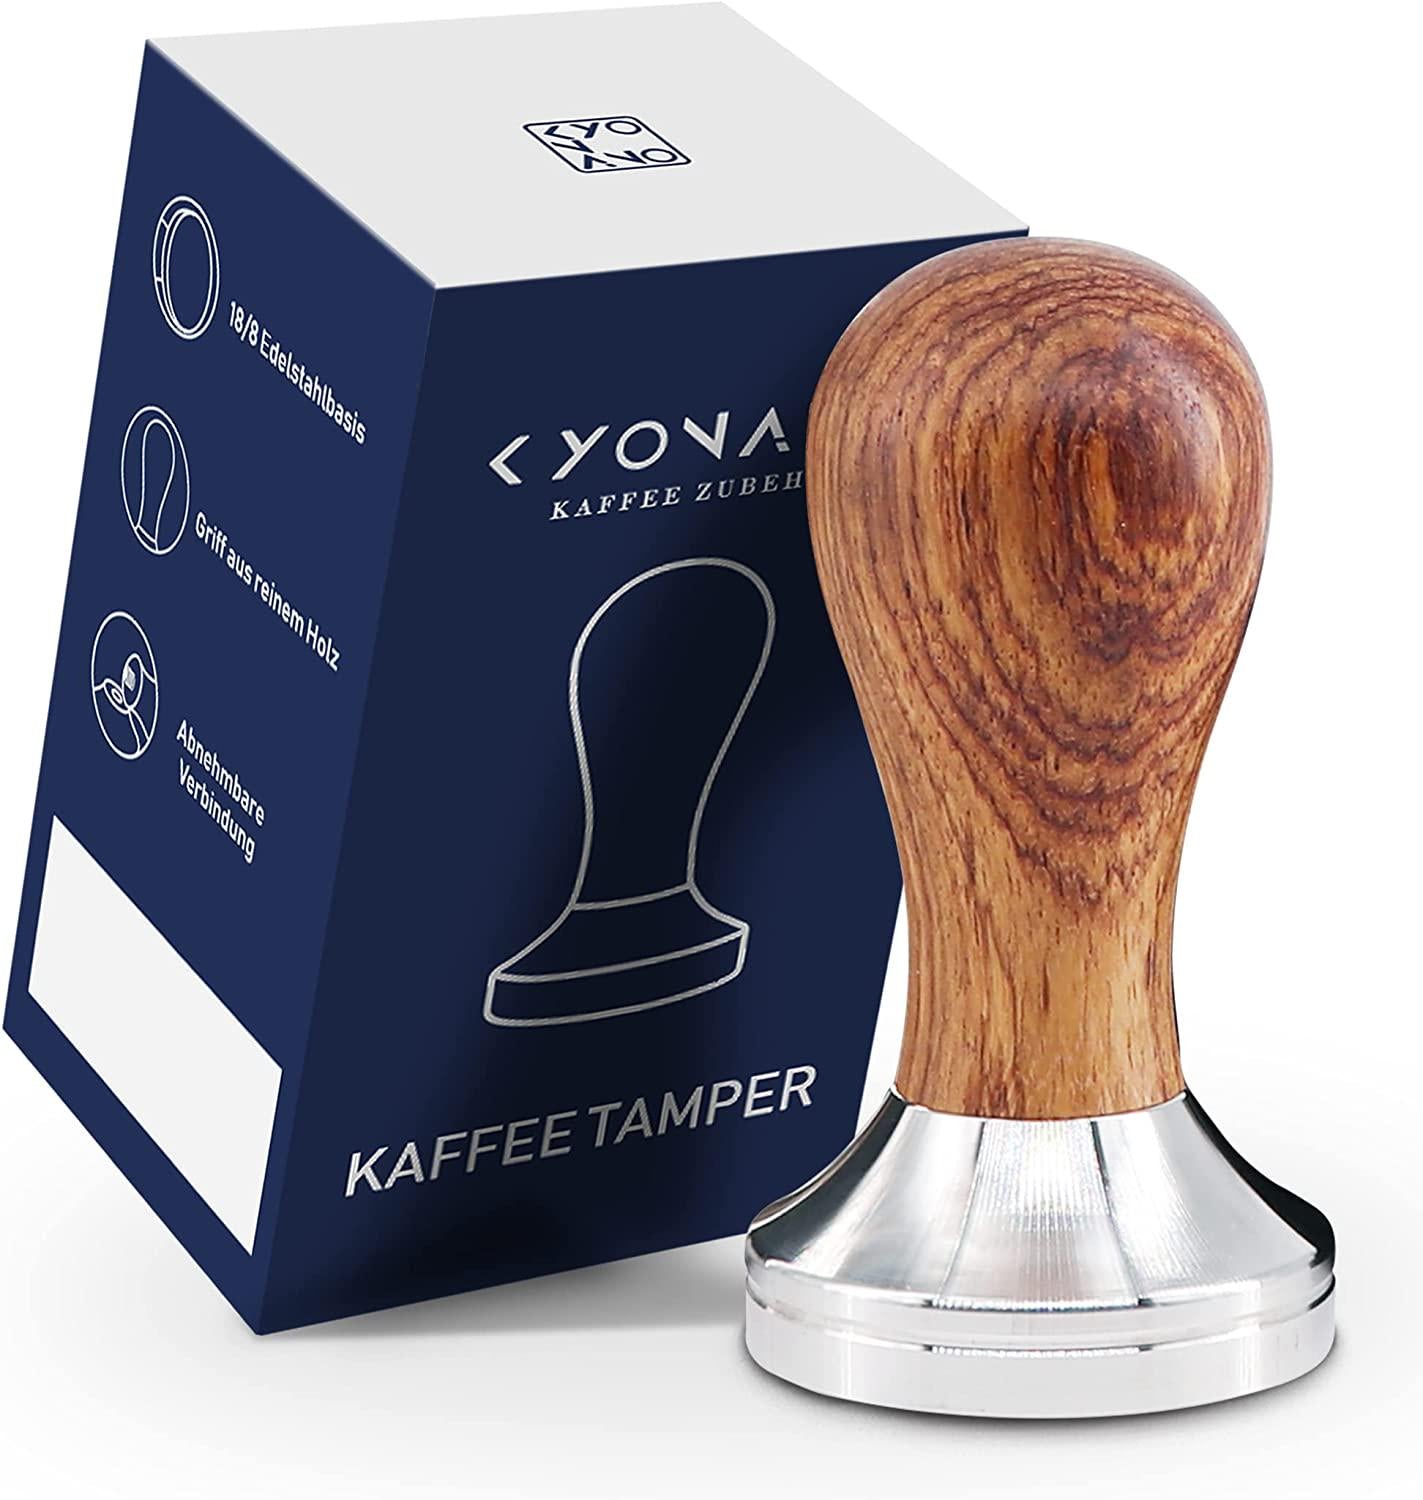 KYONANO, KYONANO 53mm Coffee Tamper - Espresso Coffee Tamper - Coffee Tamper with Stainless Steel Base and Scented Rosewood Handle - Modern Professional Barista and Beginner Coffee Shop Supplies